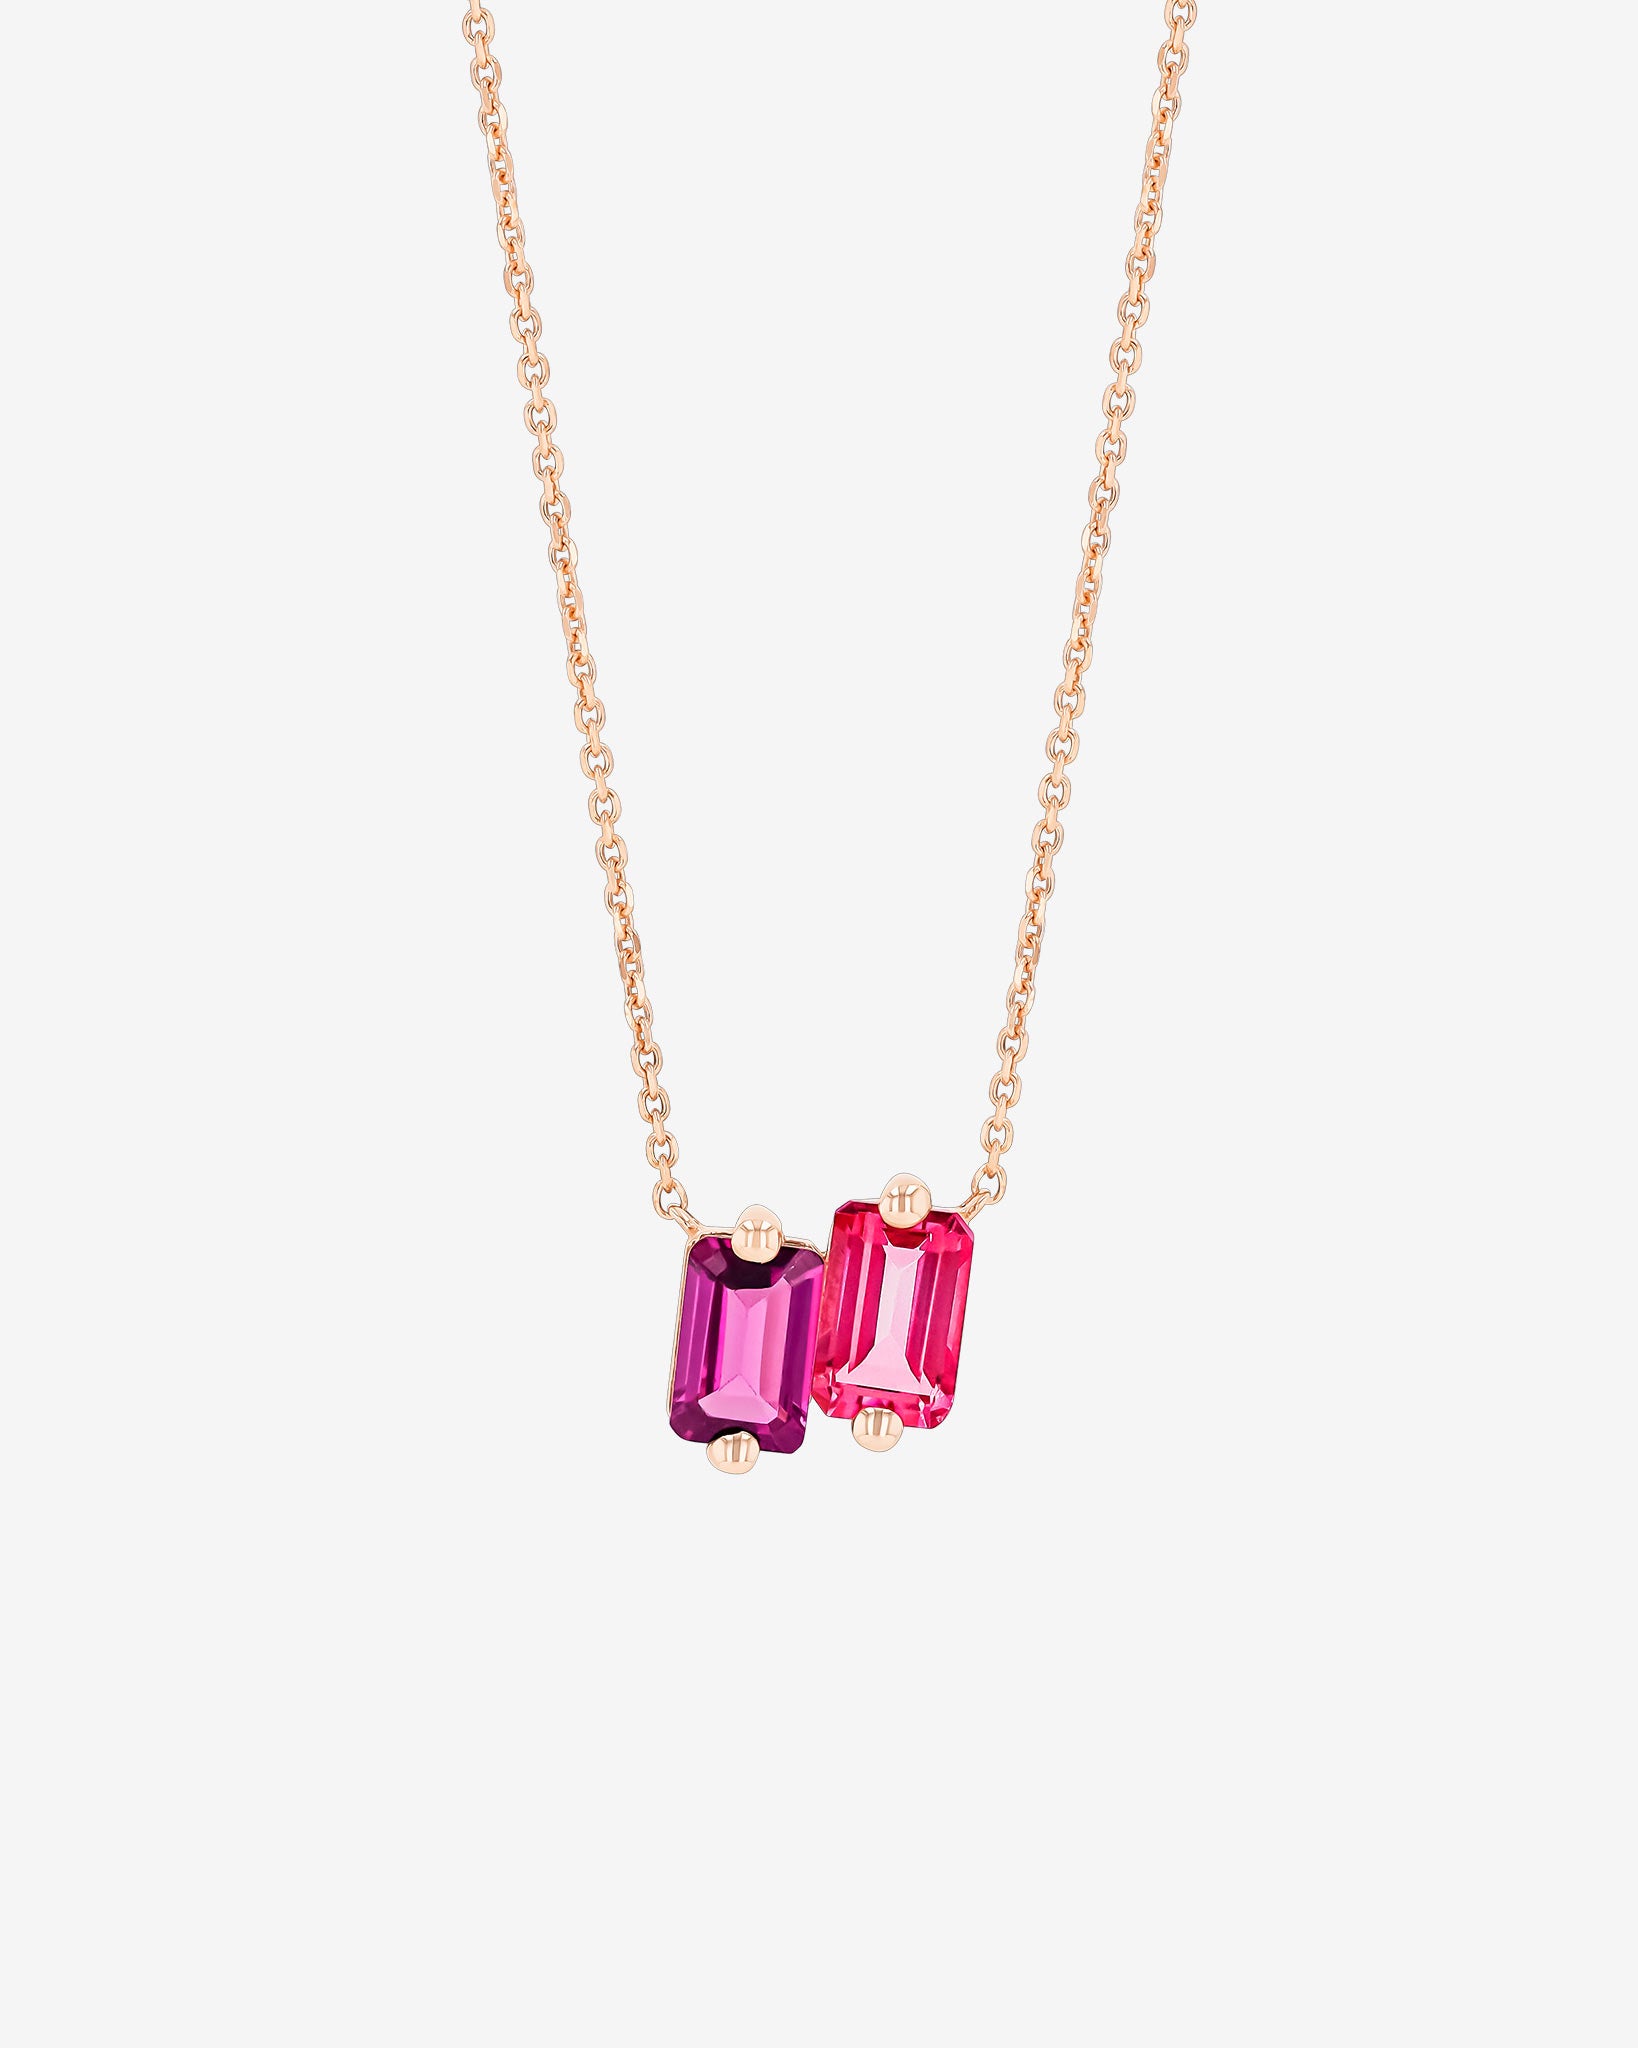 Kalan By Suzanne Kalan Ann Red Ombre Mini Pendant in 14k rose gold